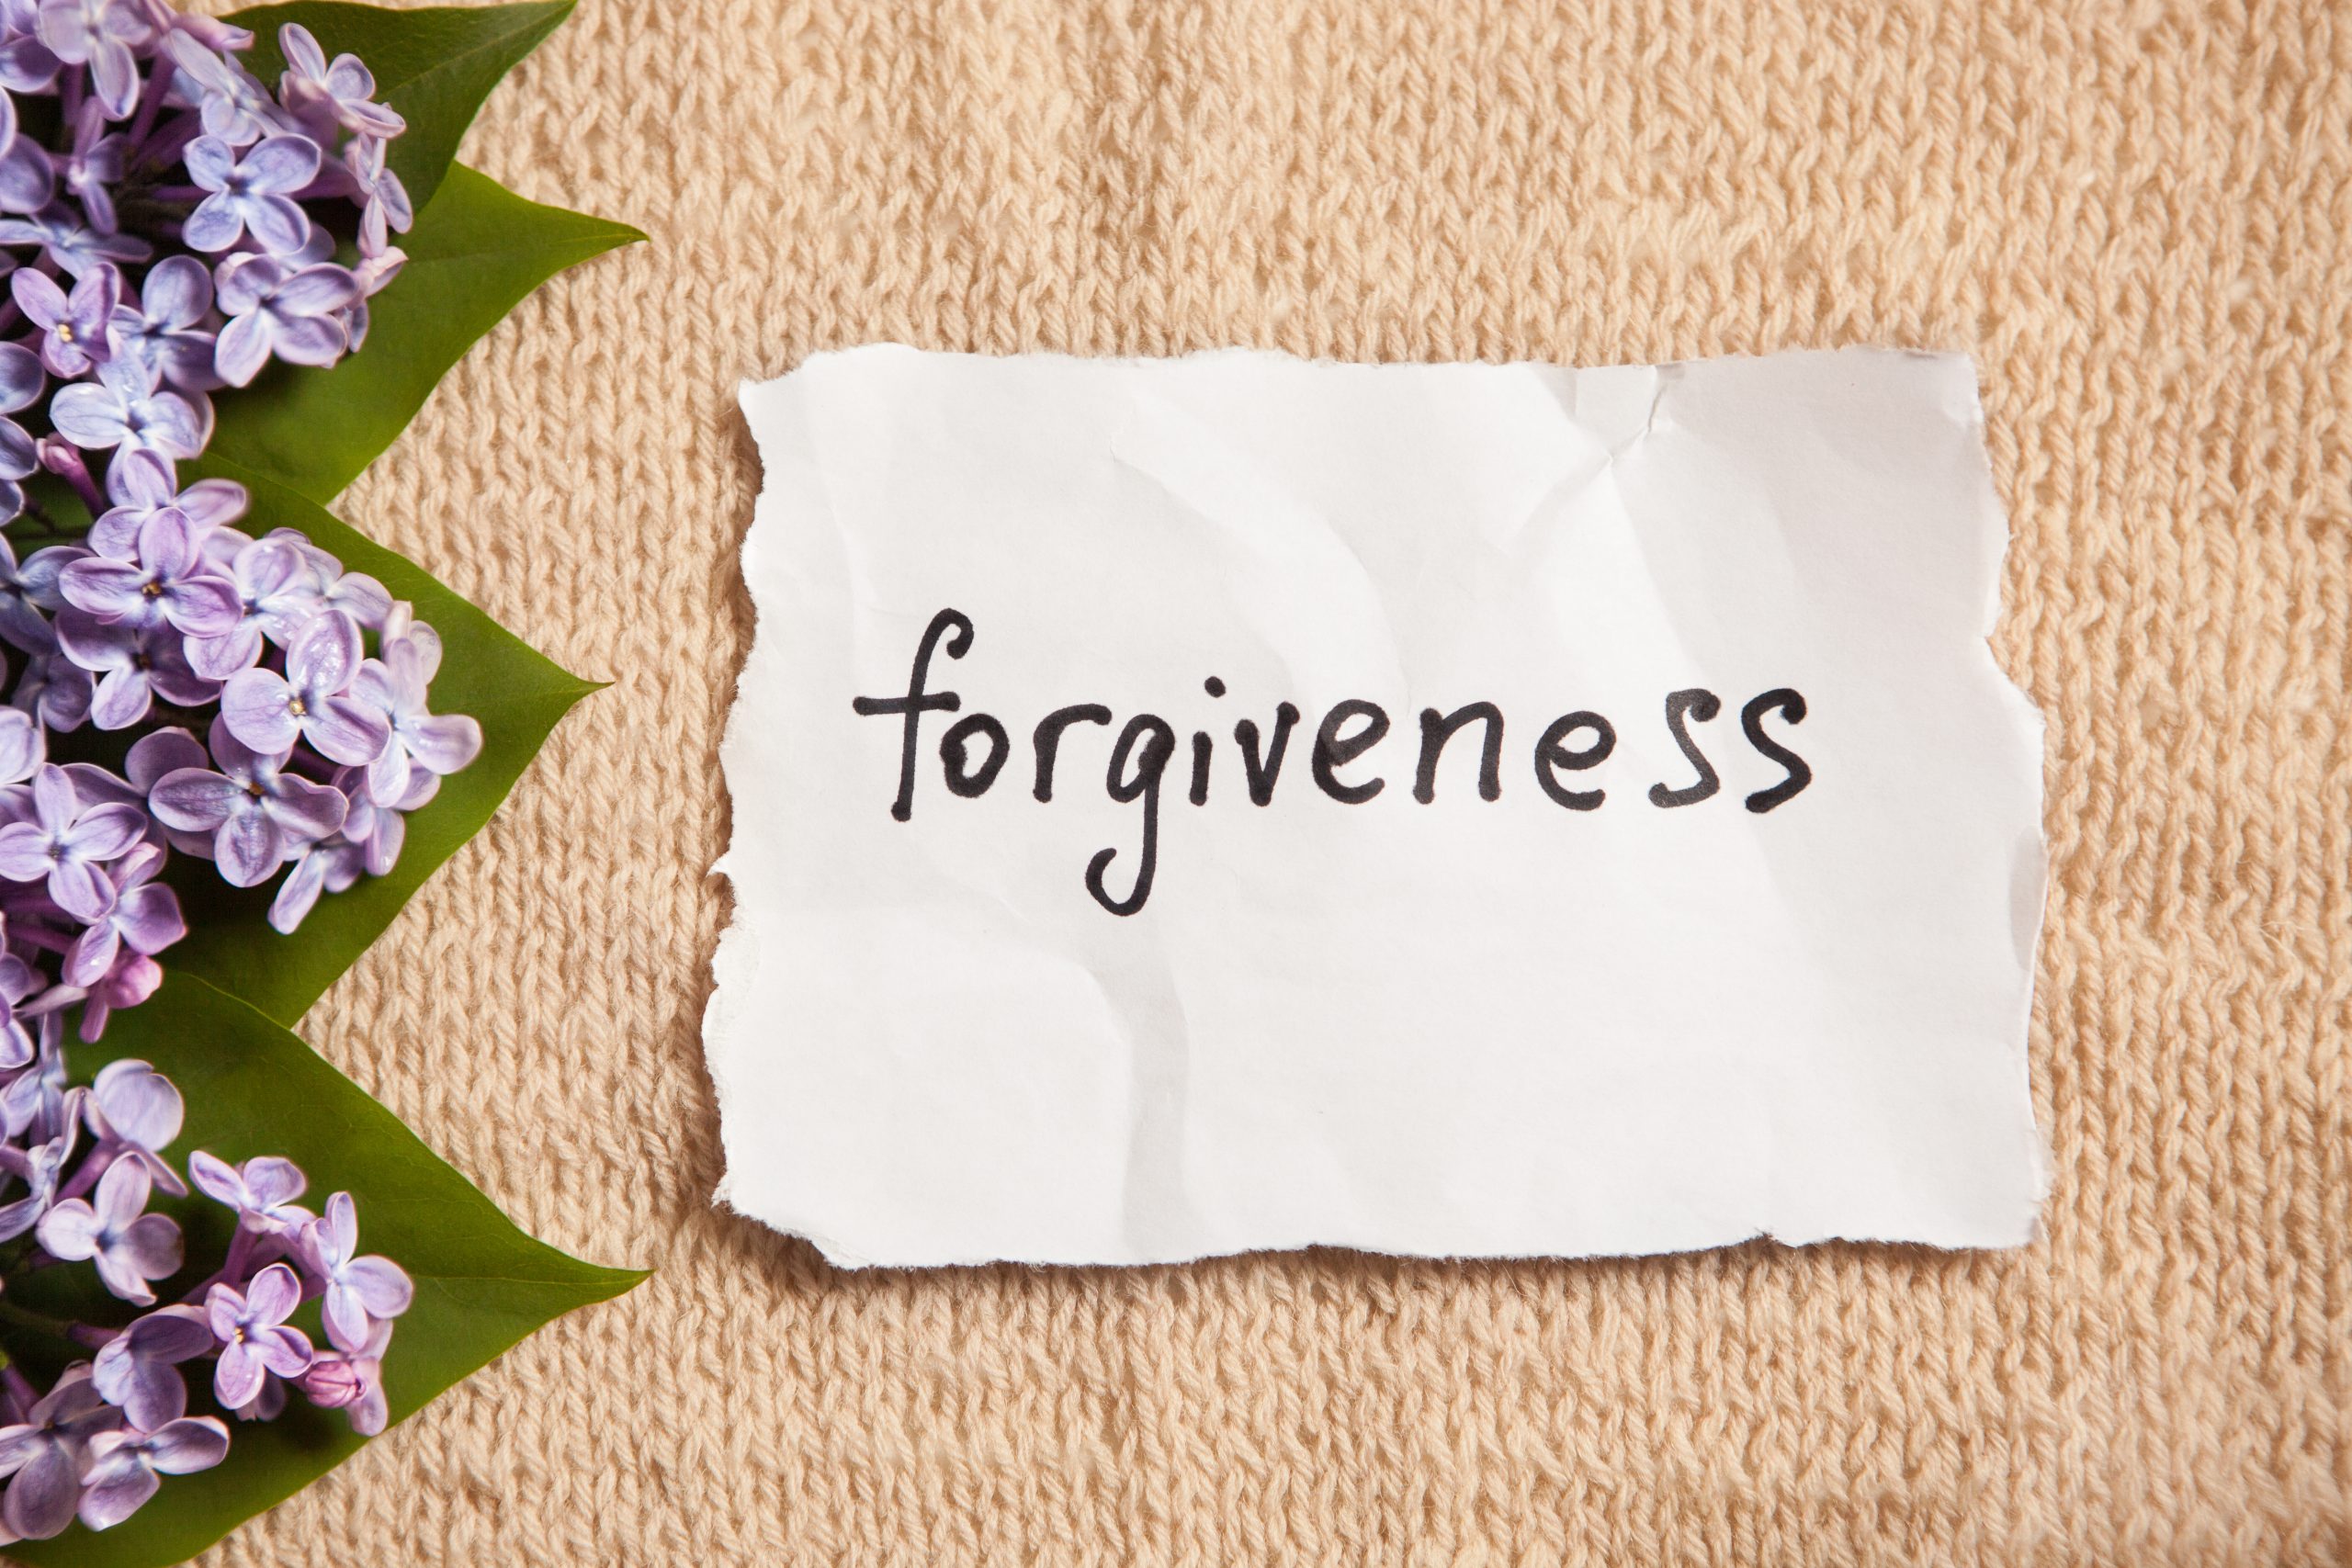 Forgiveness and positive ageing